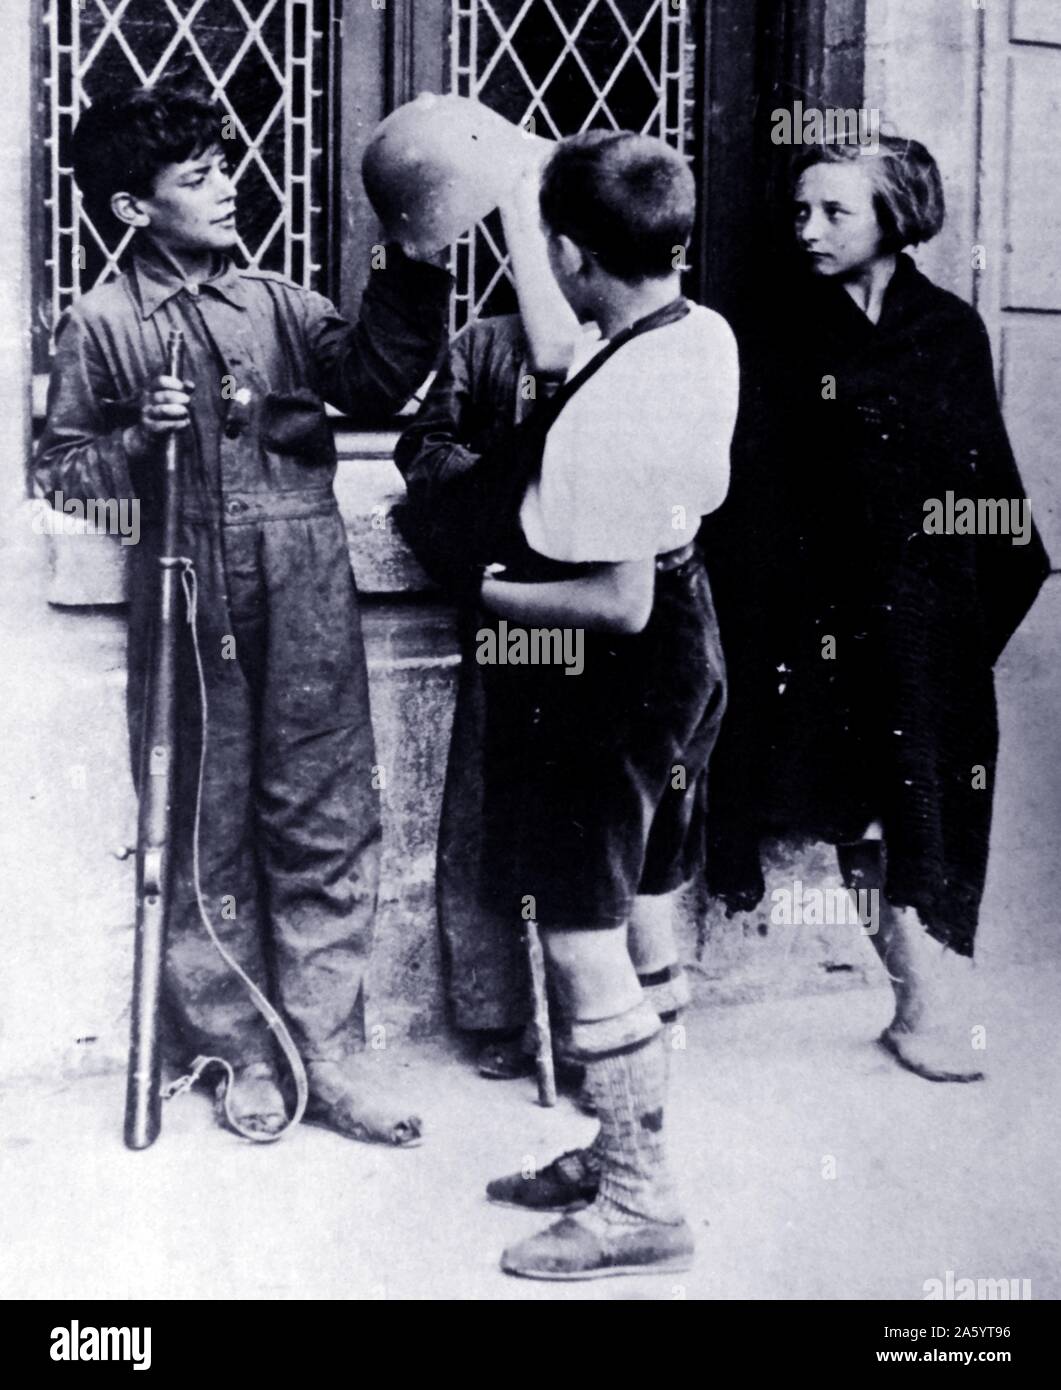 Three boys and a girl with weapons in the spring of 1937 during the Spanish Civil War Stock Photo